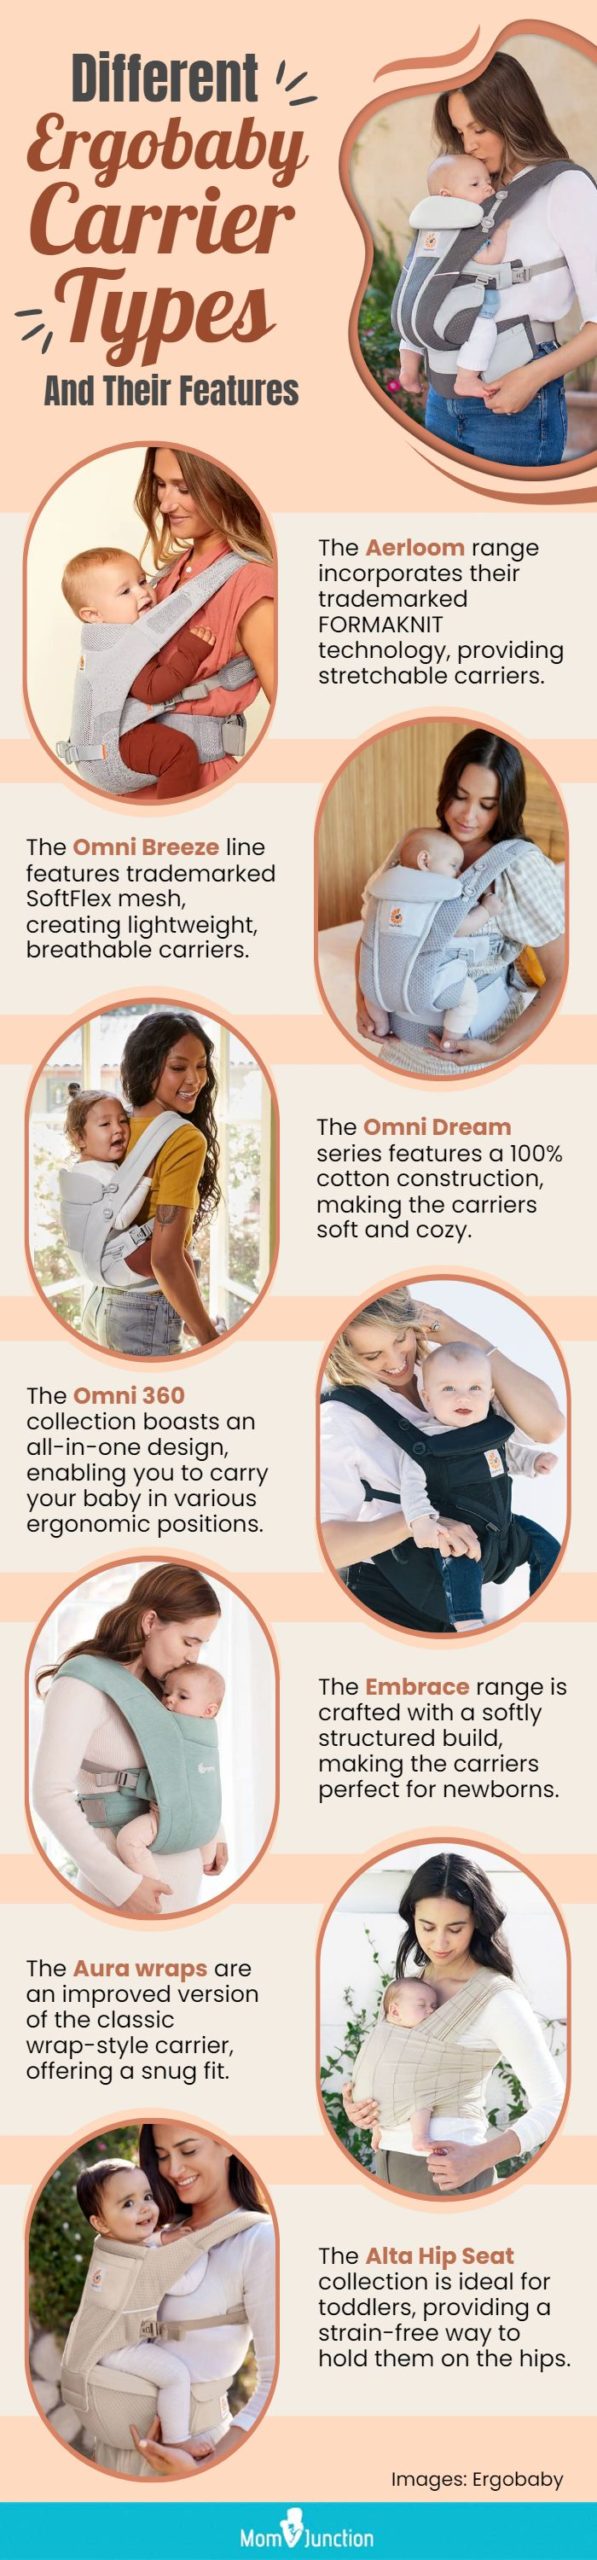 Different Ergobaby Carrier Types And Their Features (infographic)